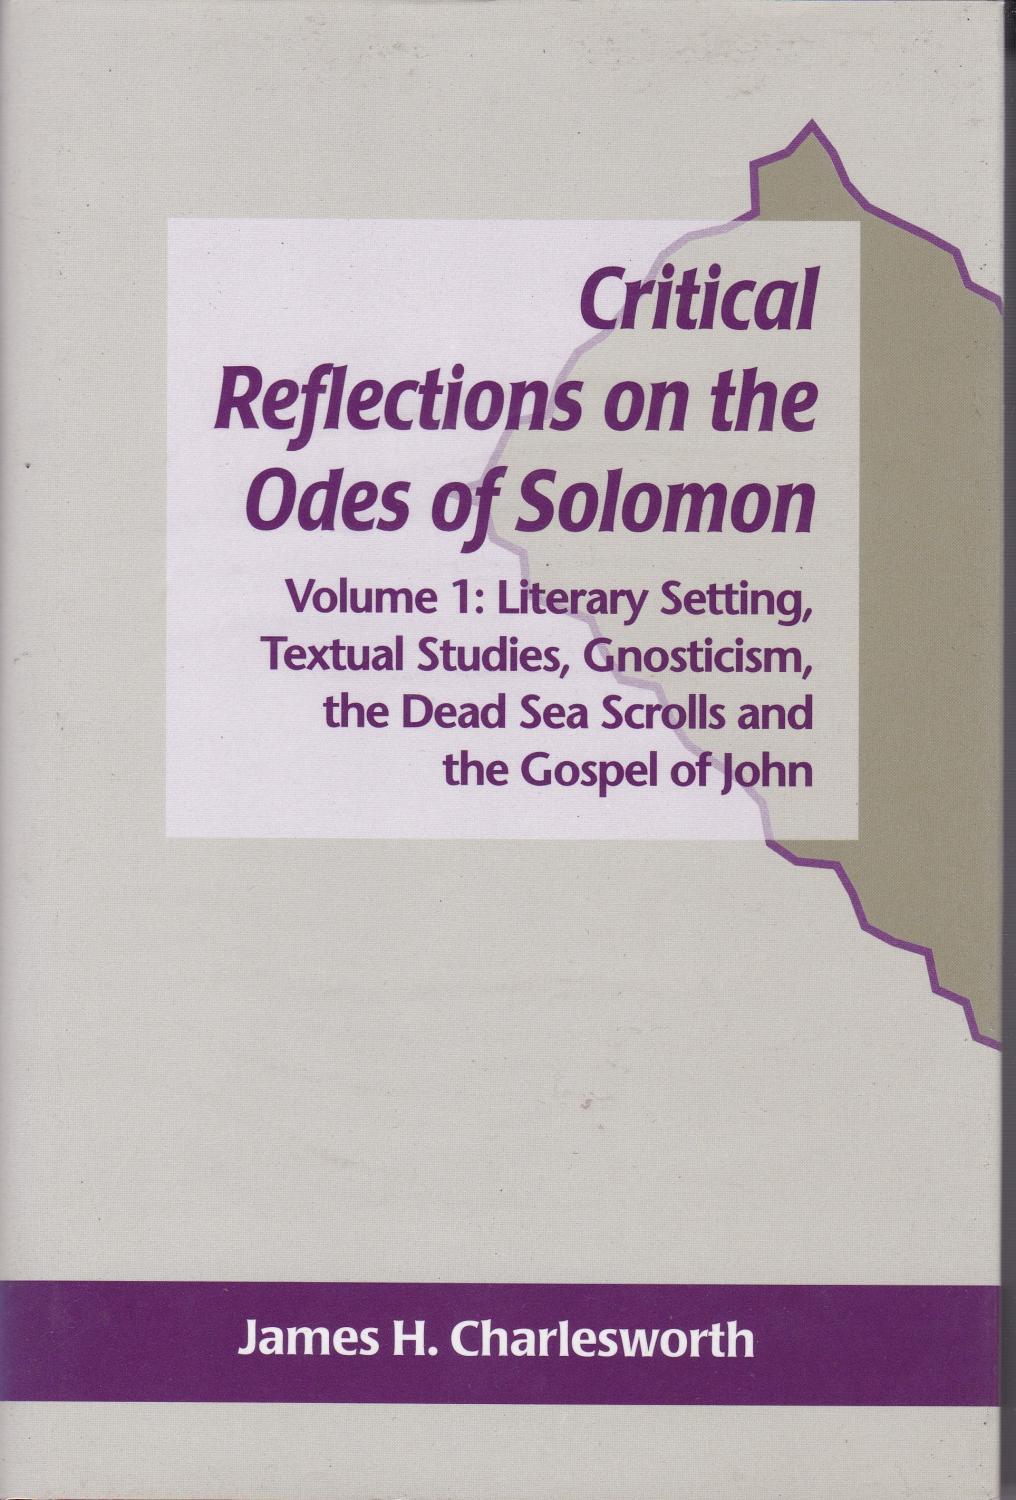 Critical Reflections on the Odes of Solomon. Volume 1: Literary Setting, Textual Studies, Gnosticism, the Dead Sea Scrolls and the Gospel of John. - Charlesworth, James H.